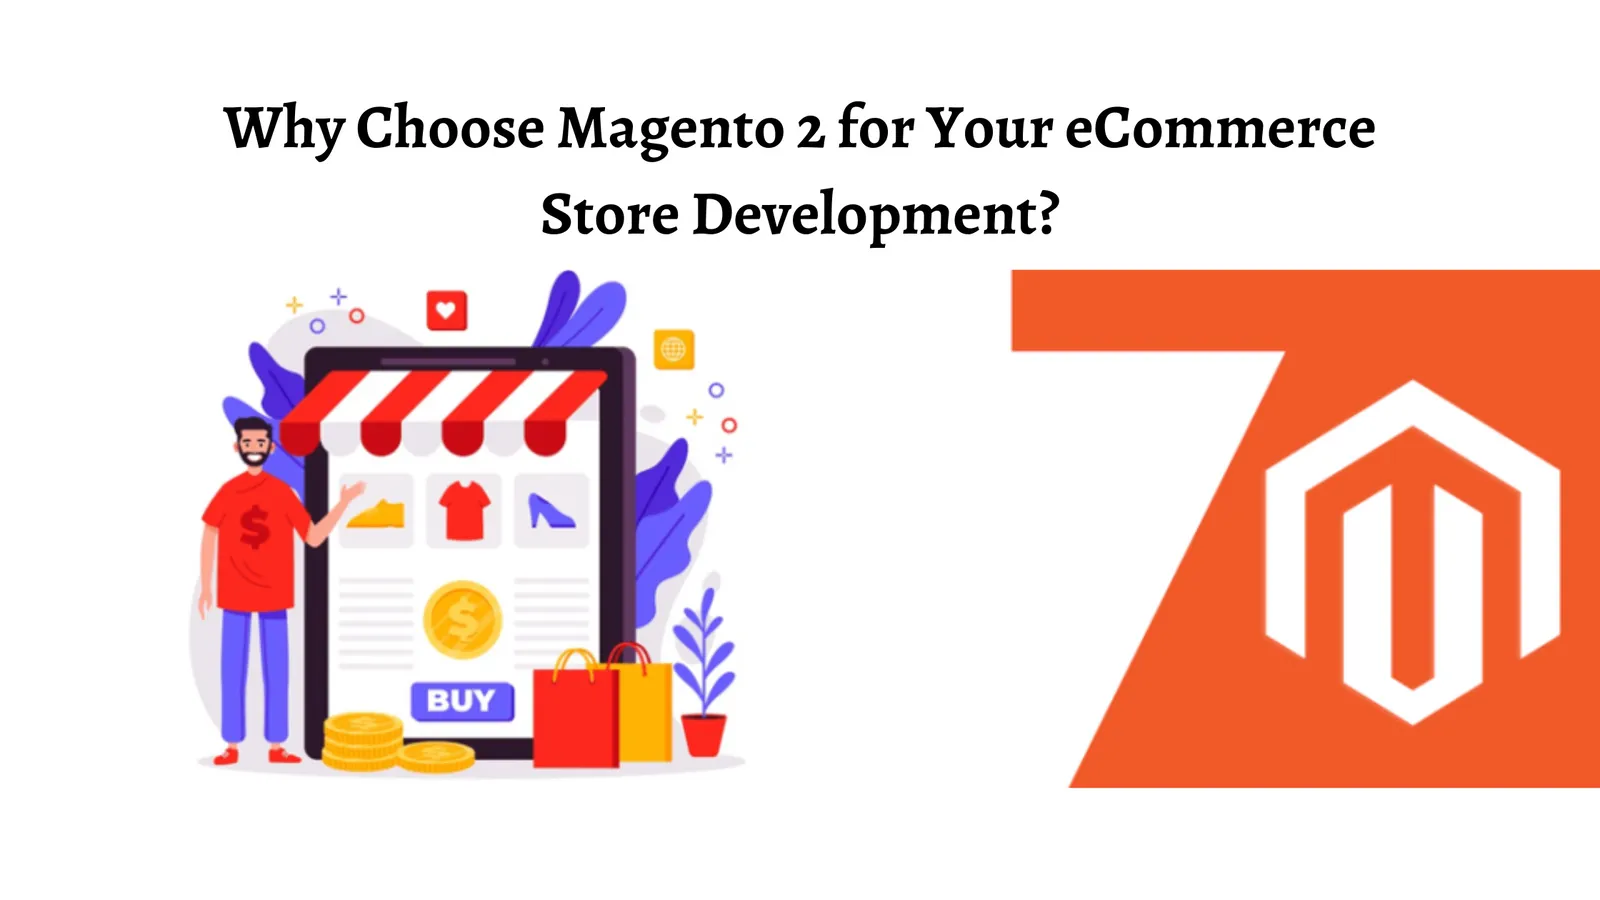 Why Choose Magento 2 for Your eCommerce Store Development?